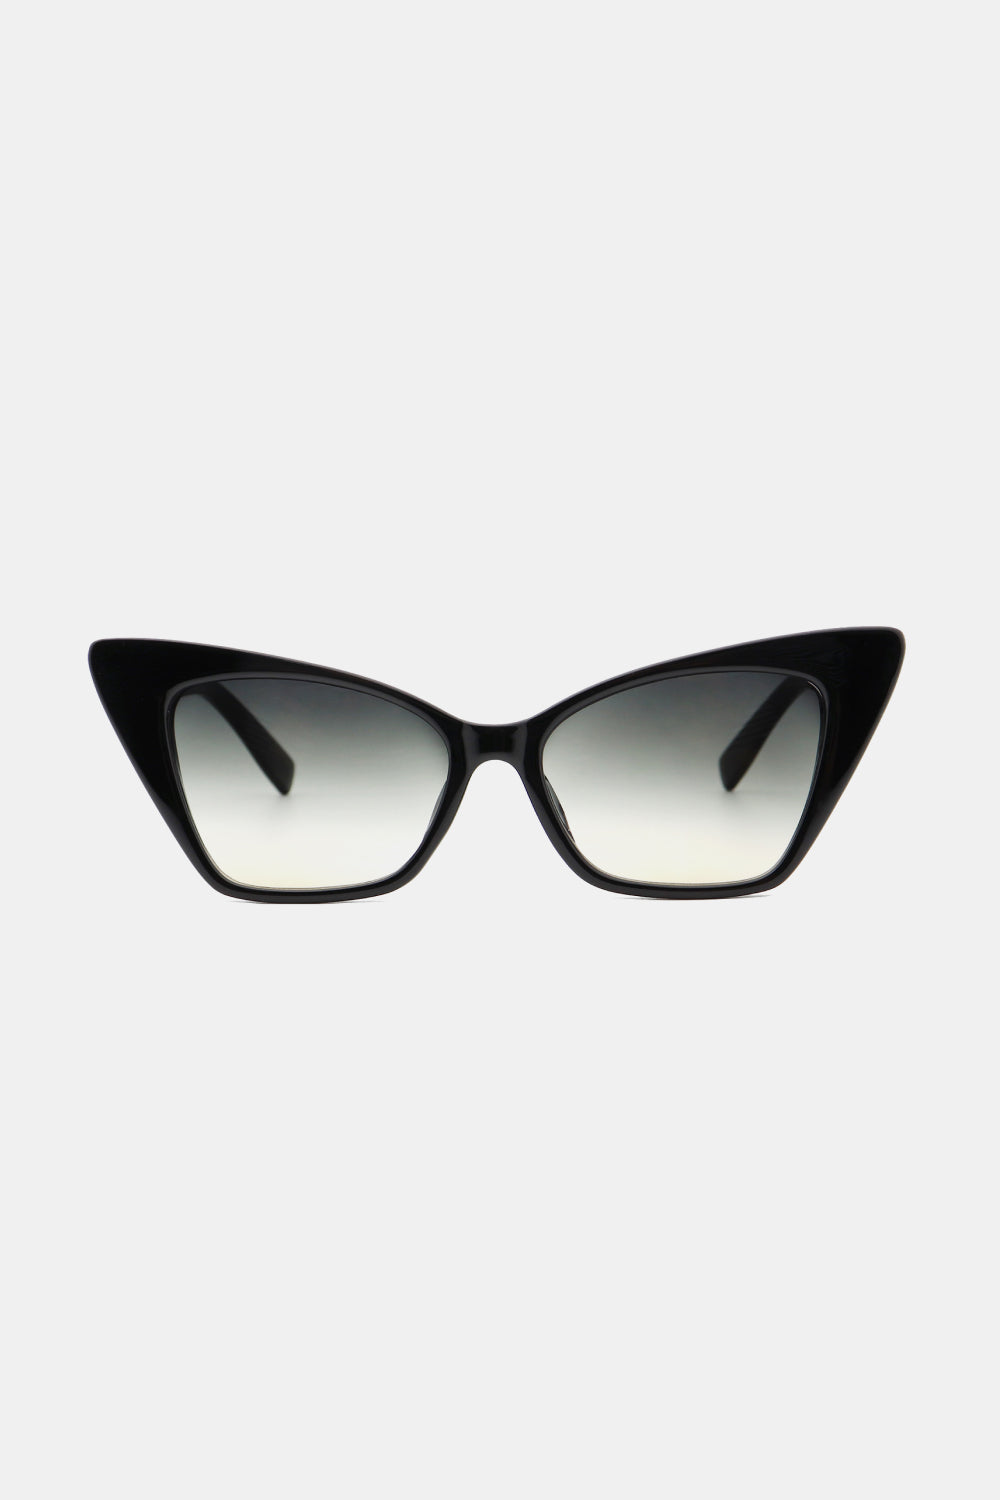 Acetate Lens Cat Eye Sunglasses Print on any thing USA/STOD clothes